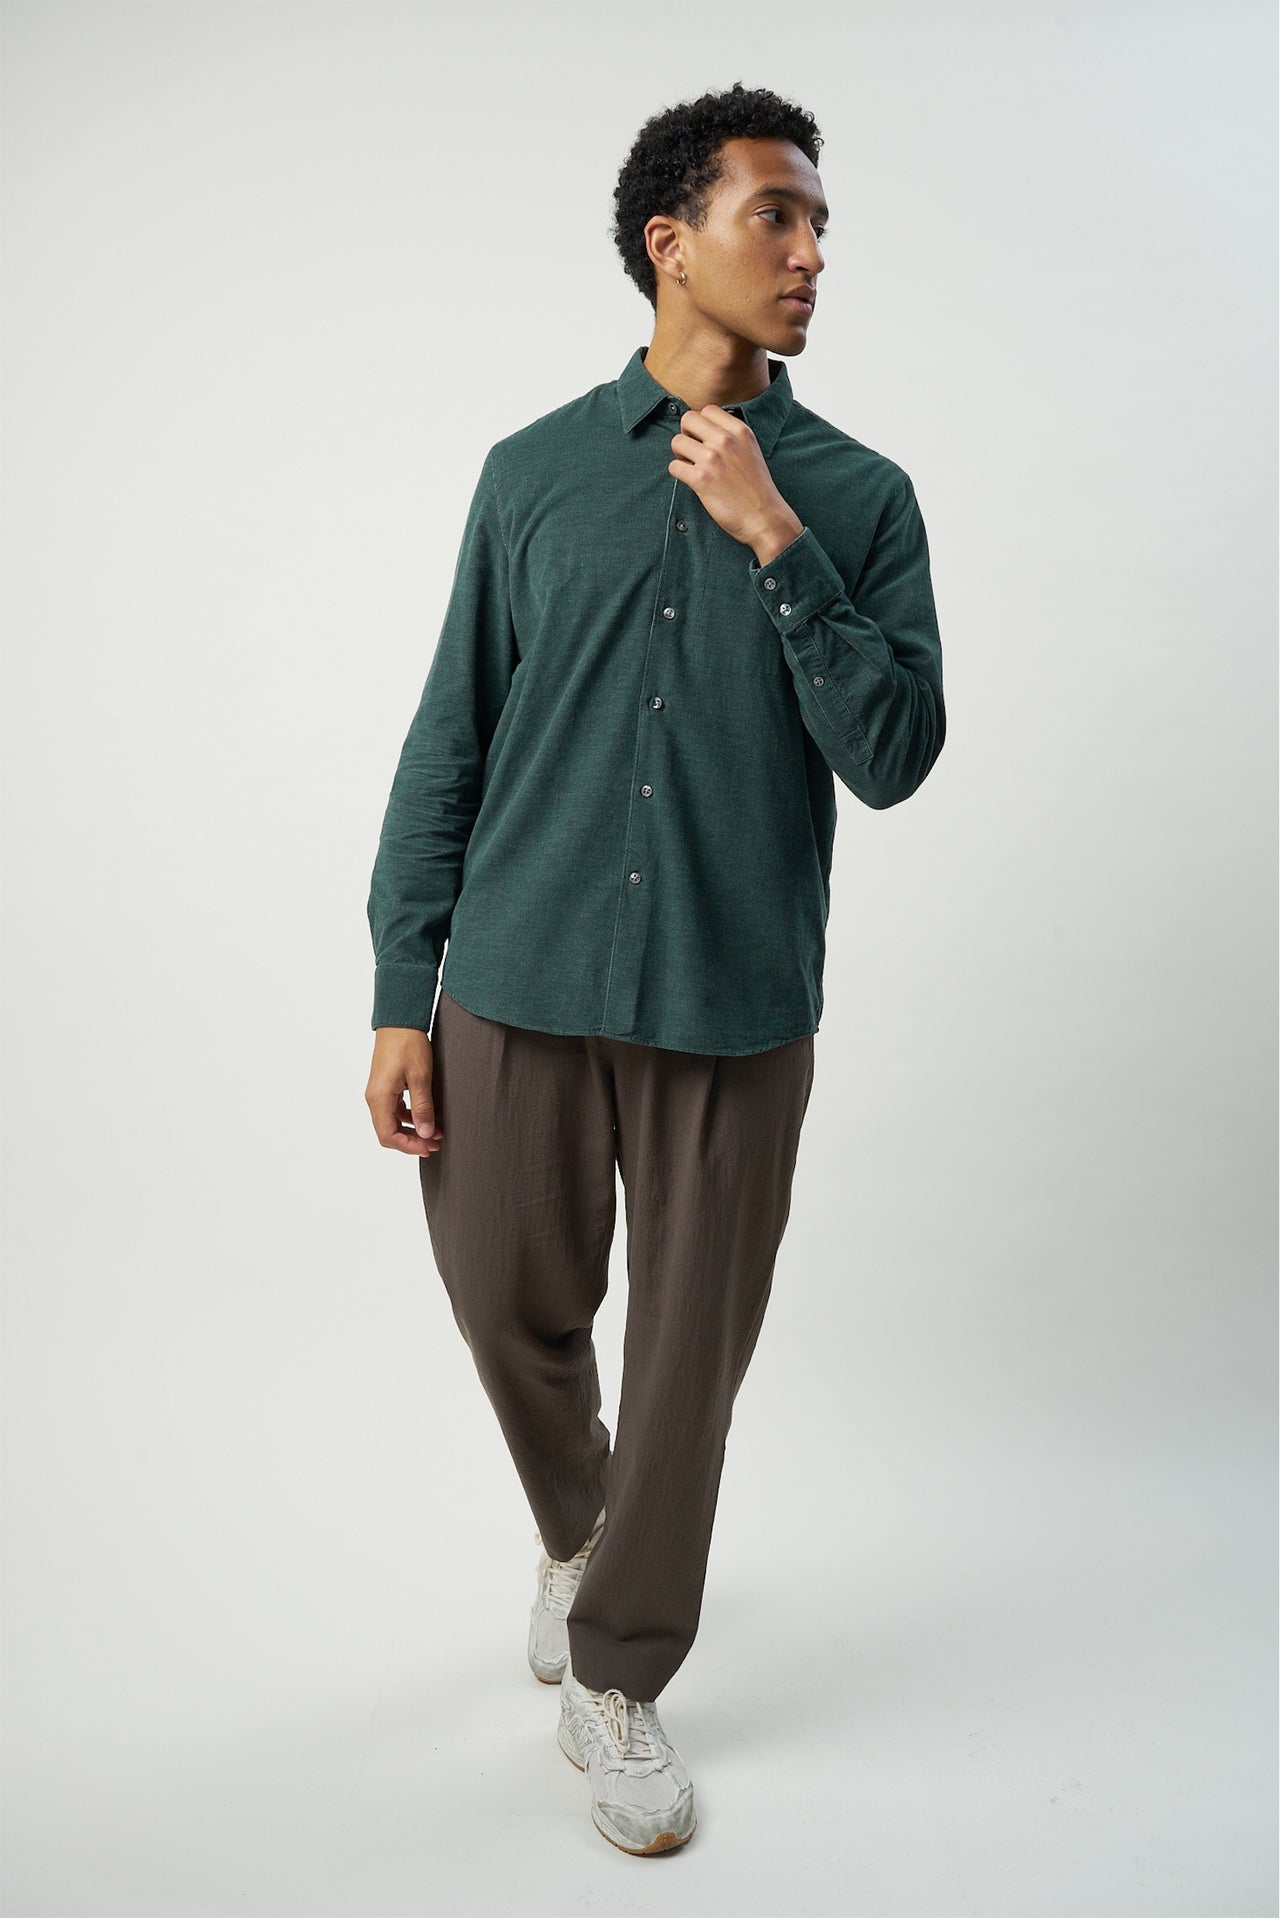 Feel Good Shirt in a Moss Green Japanese Baby Corduroy Cotton